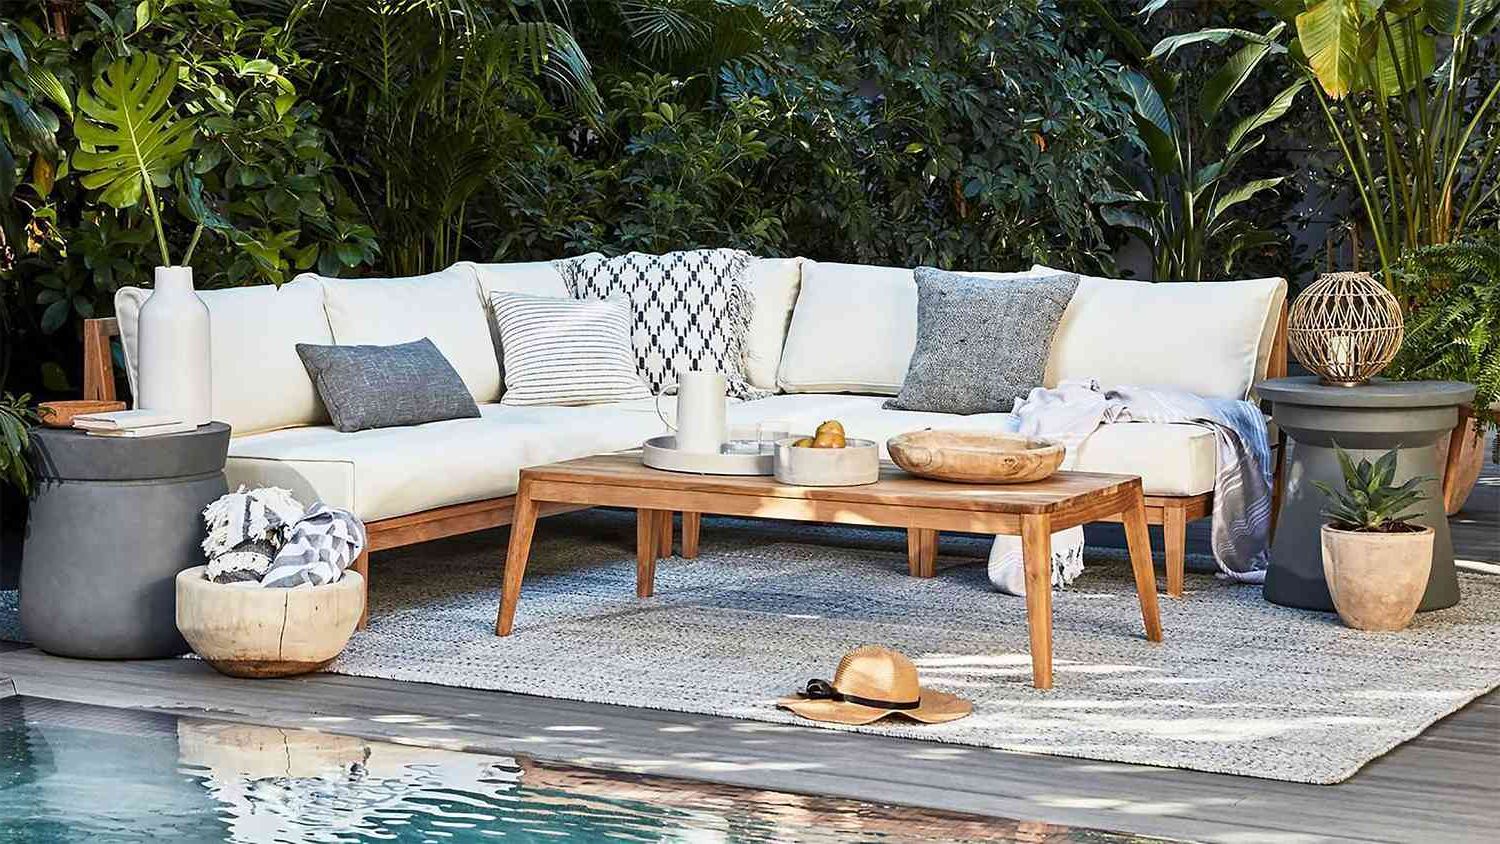 Preferred Outer's Outdoor Sectional Is More Comfortable Than My Indoor Couch For Outdoor Couch Cushions, Throw Pillows And Slat Coffee Table (View 2 of 15)